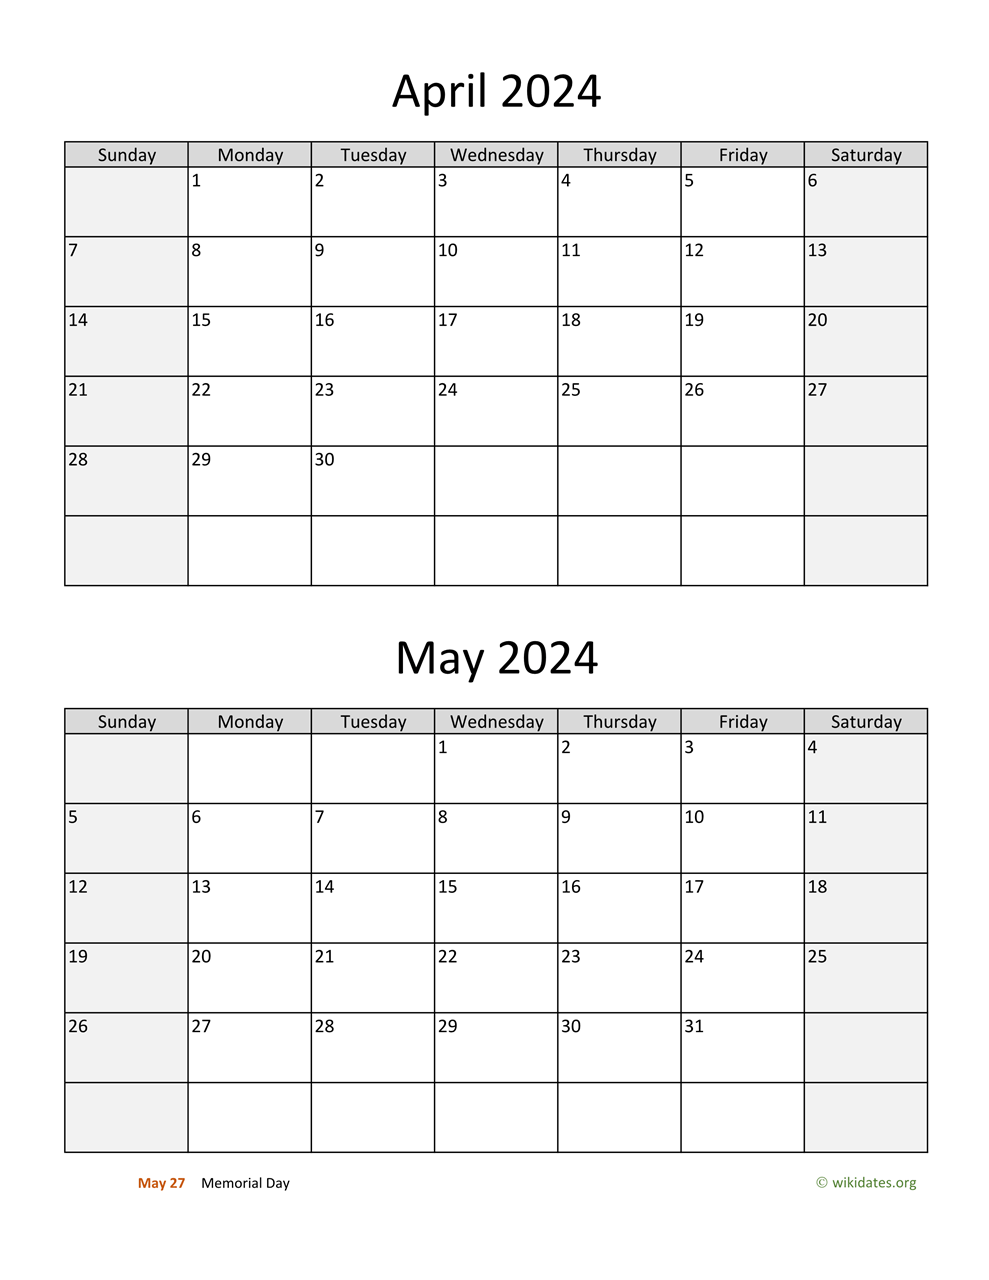 April And May 2024 Calendar | Wikidates for Calendar April And May 2024 Printable